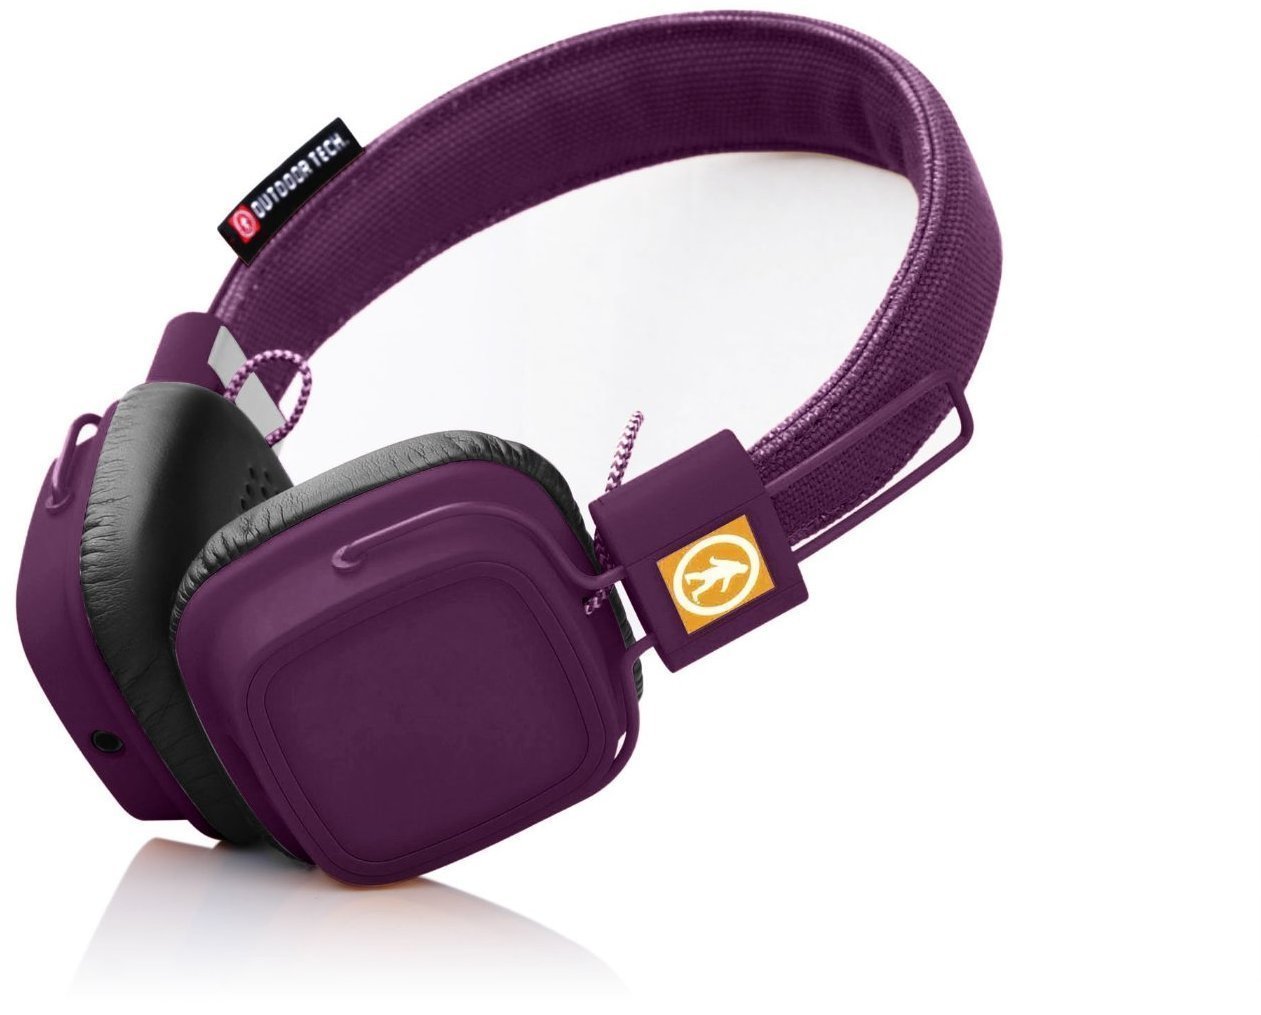 Auriculares inalámbricos On-ear Outdoor Tech Privates - Wireless Touch Control Headphones - Purplish